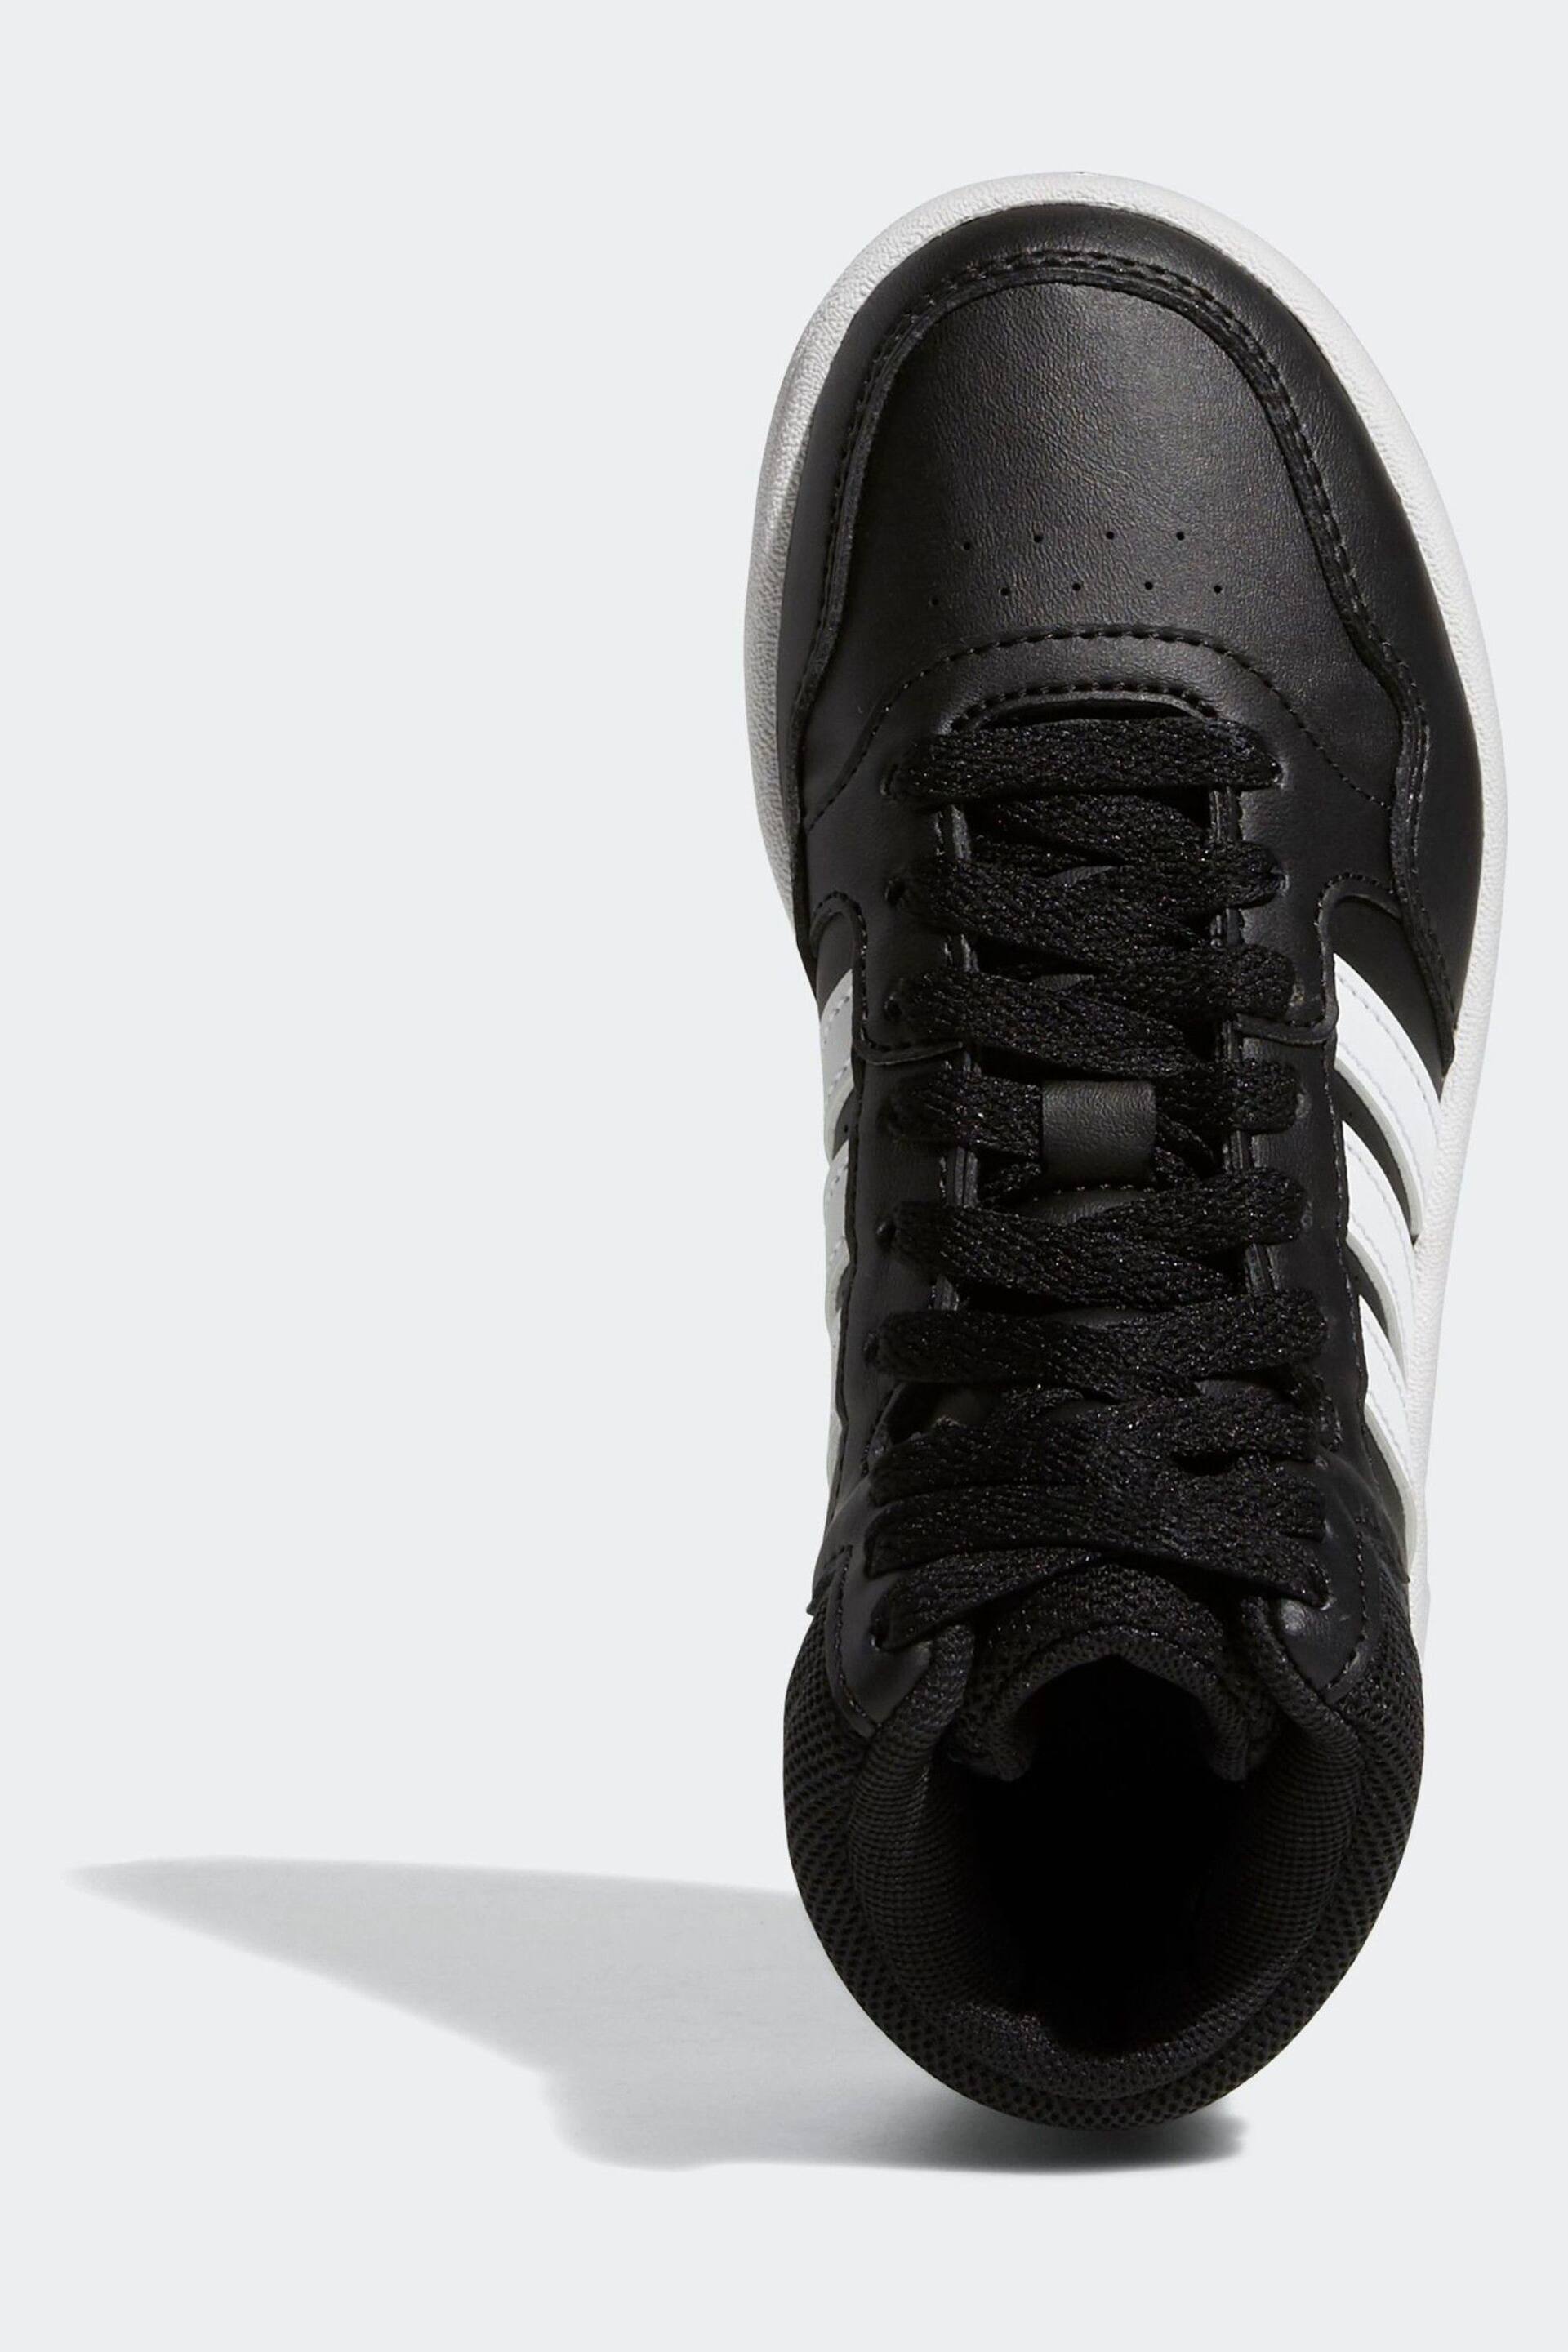 adidas Black/white Hoops Mid Shoes - Image 6 of 9